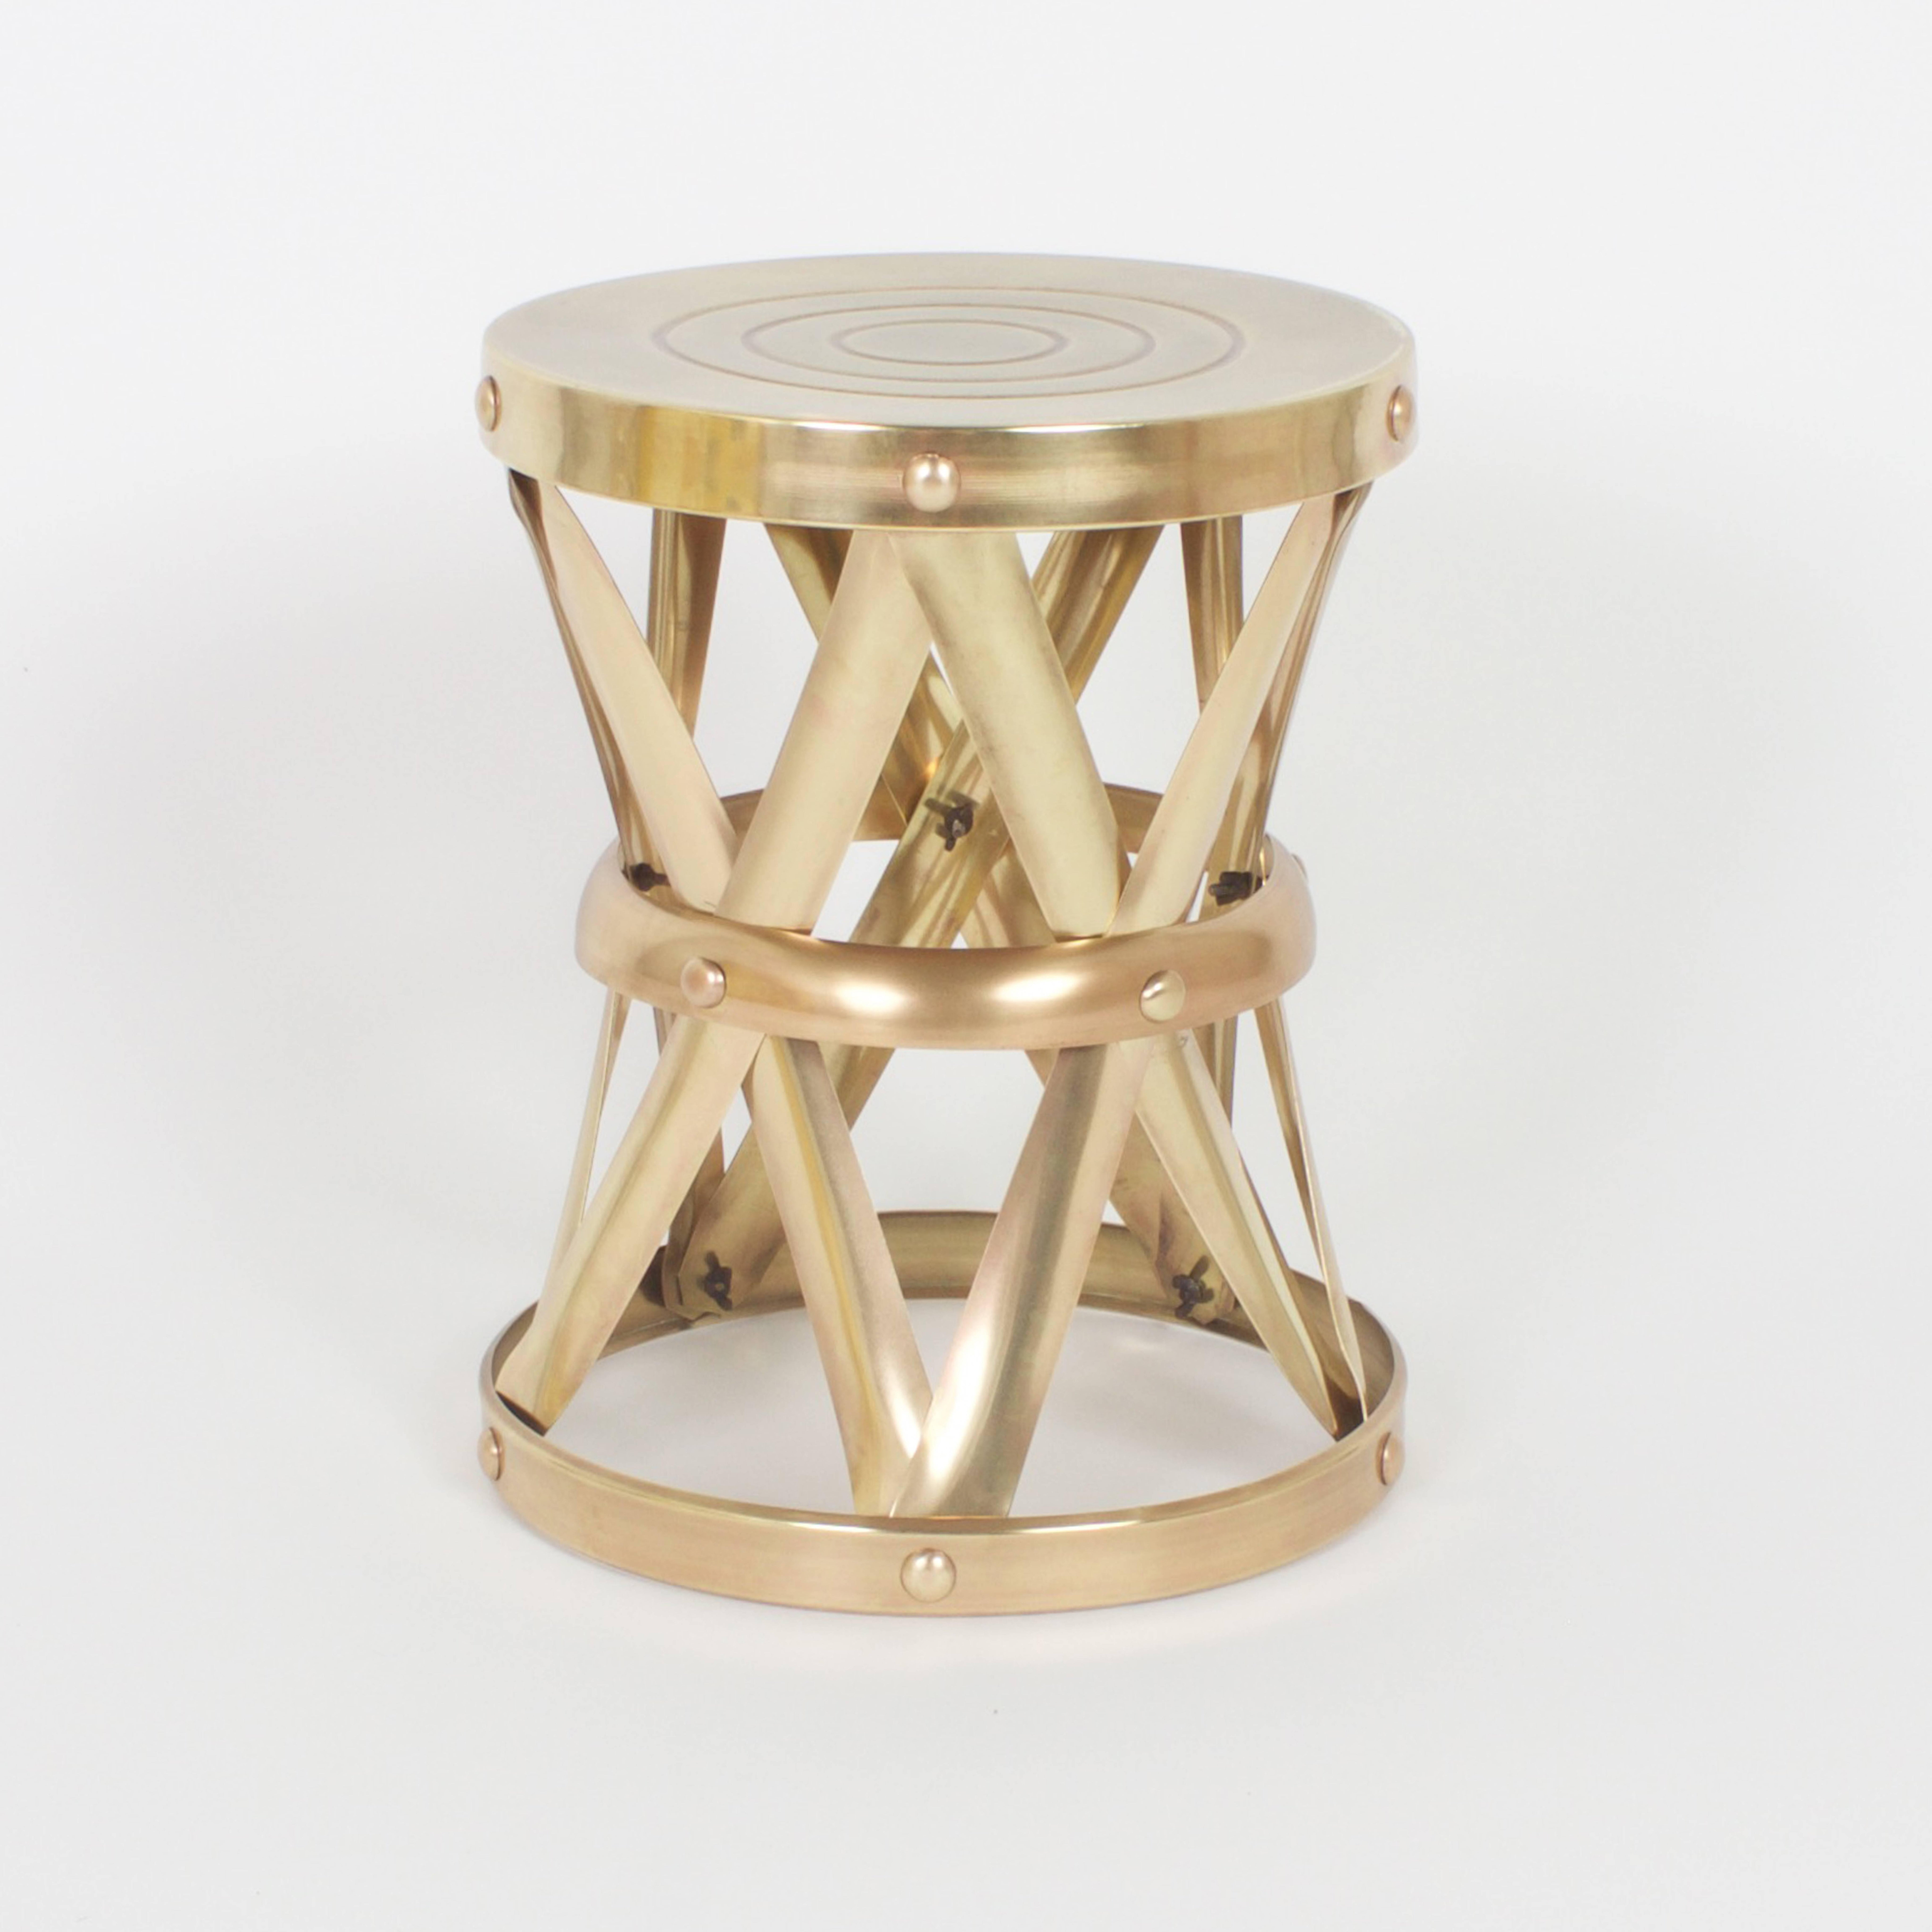 Pair of Mid-Century brass stools or pedestals with a hip Industrial construction that gives them a timeless form. Attributed to Sarried LTD, polished and lacquered for easy care.

.
 